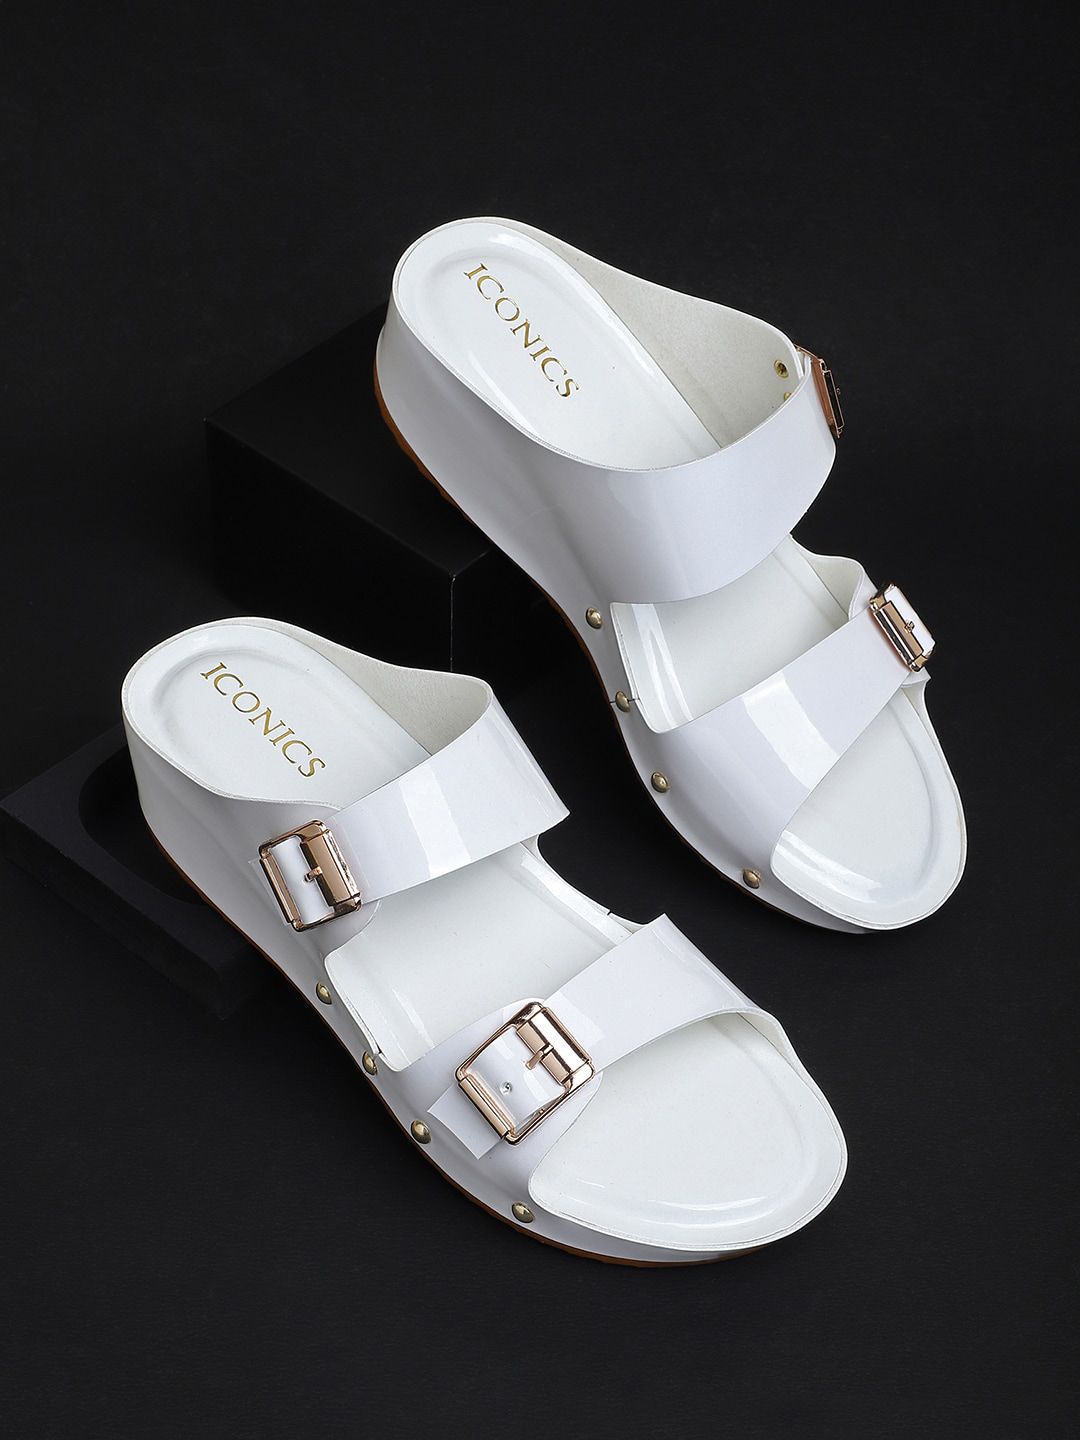 ICONICS White Comfort Sandals with Buckles Price in India